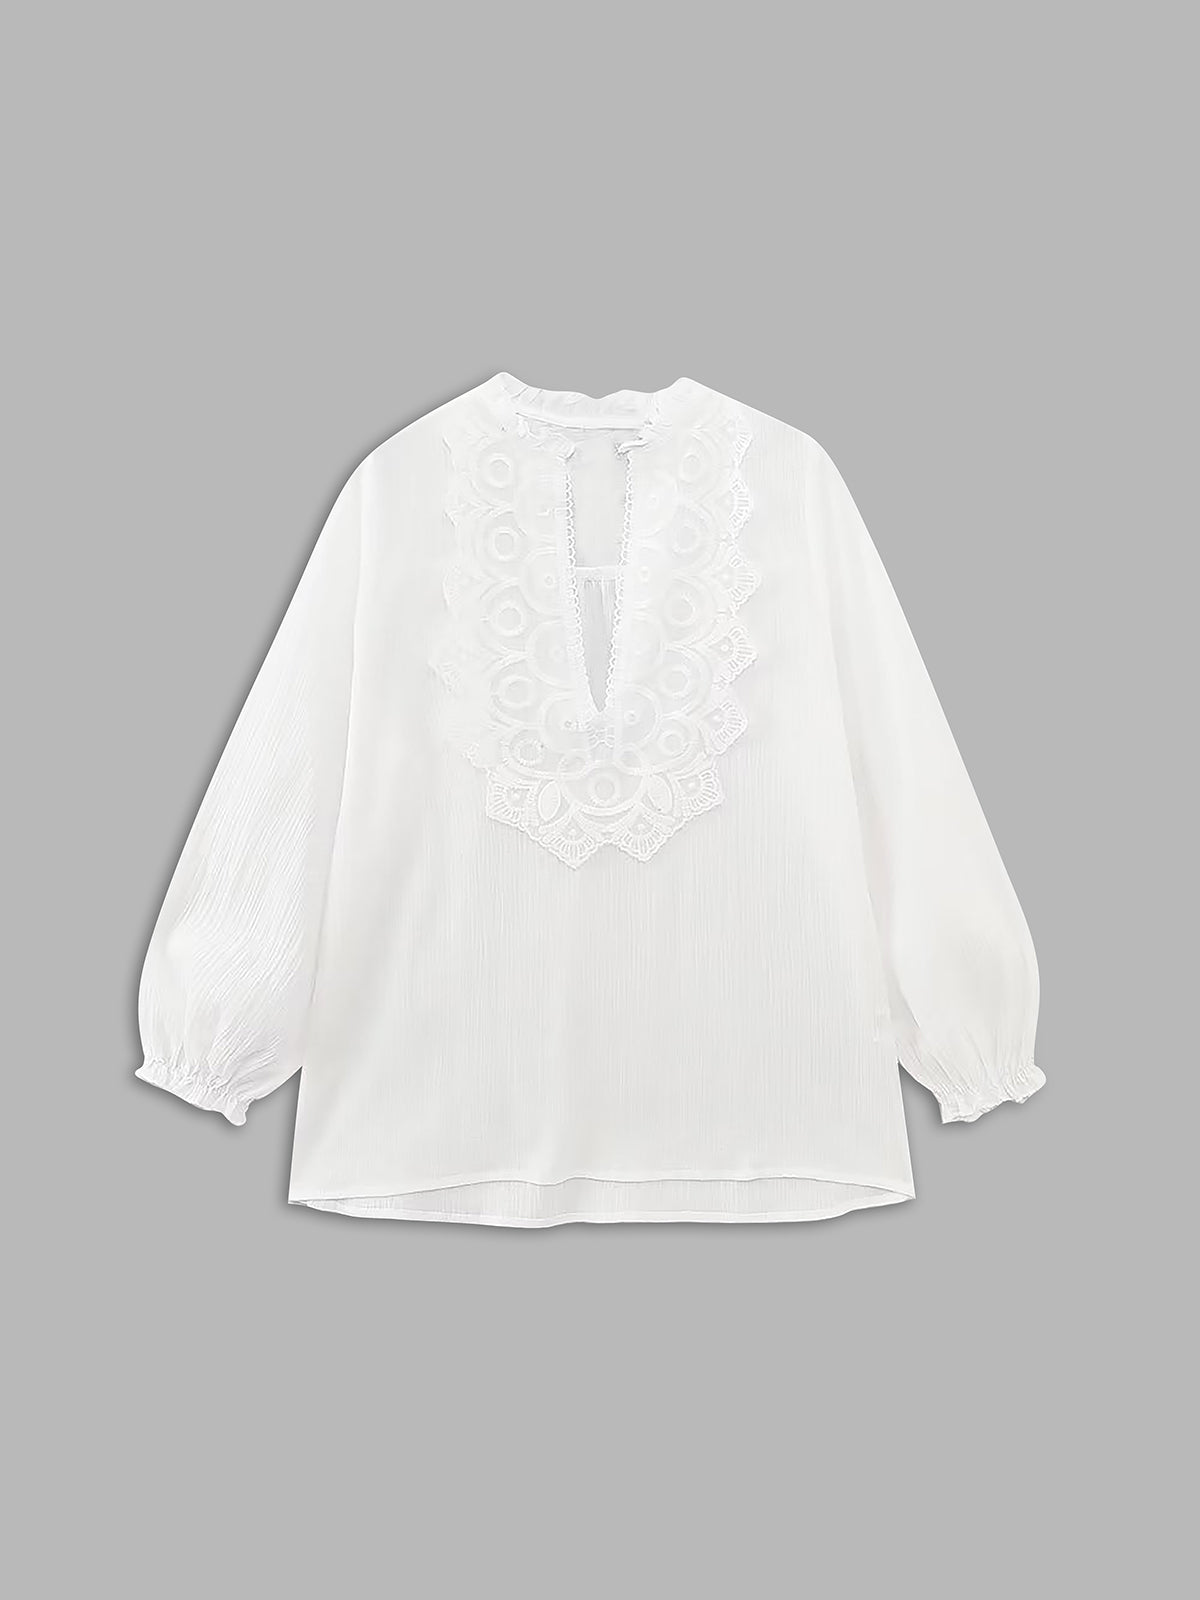 Embroideried Floral Cover Up Blouse